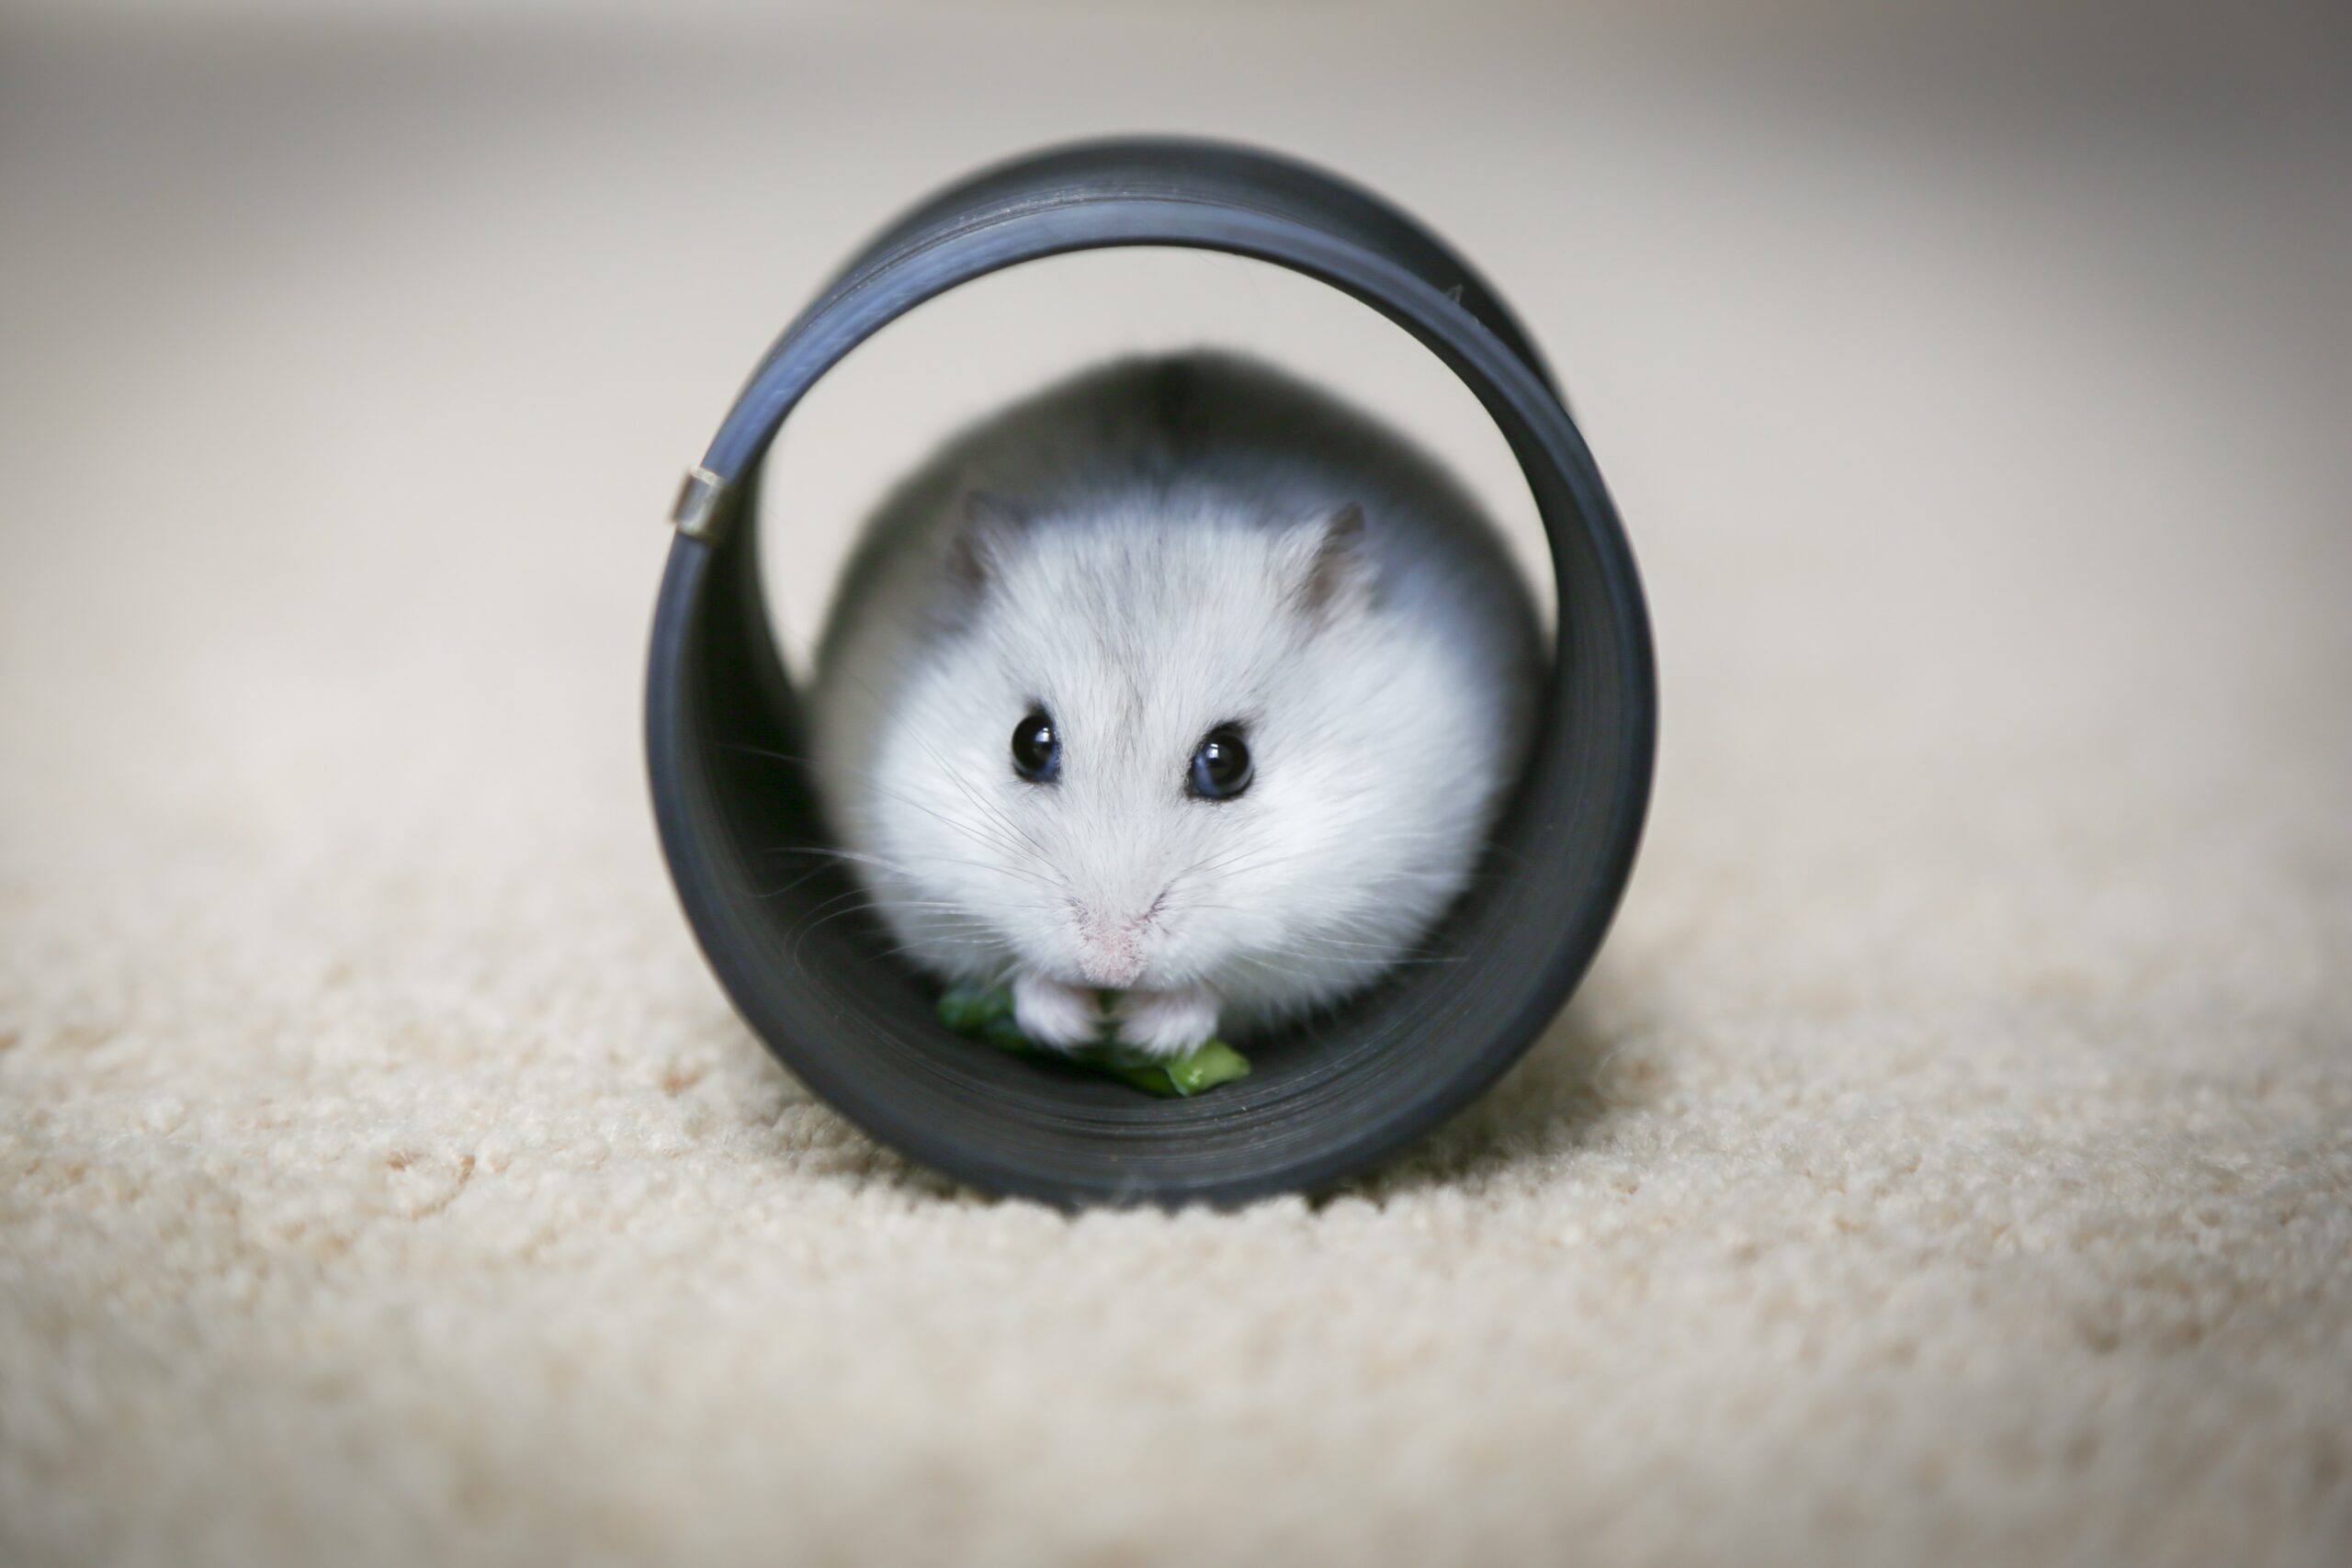 Can Hamsters Harm You?